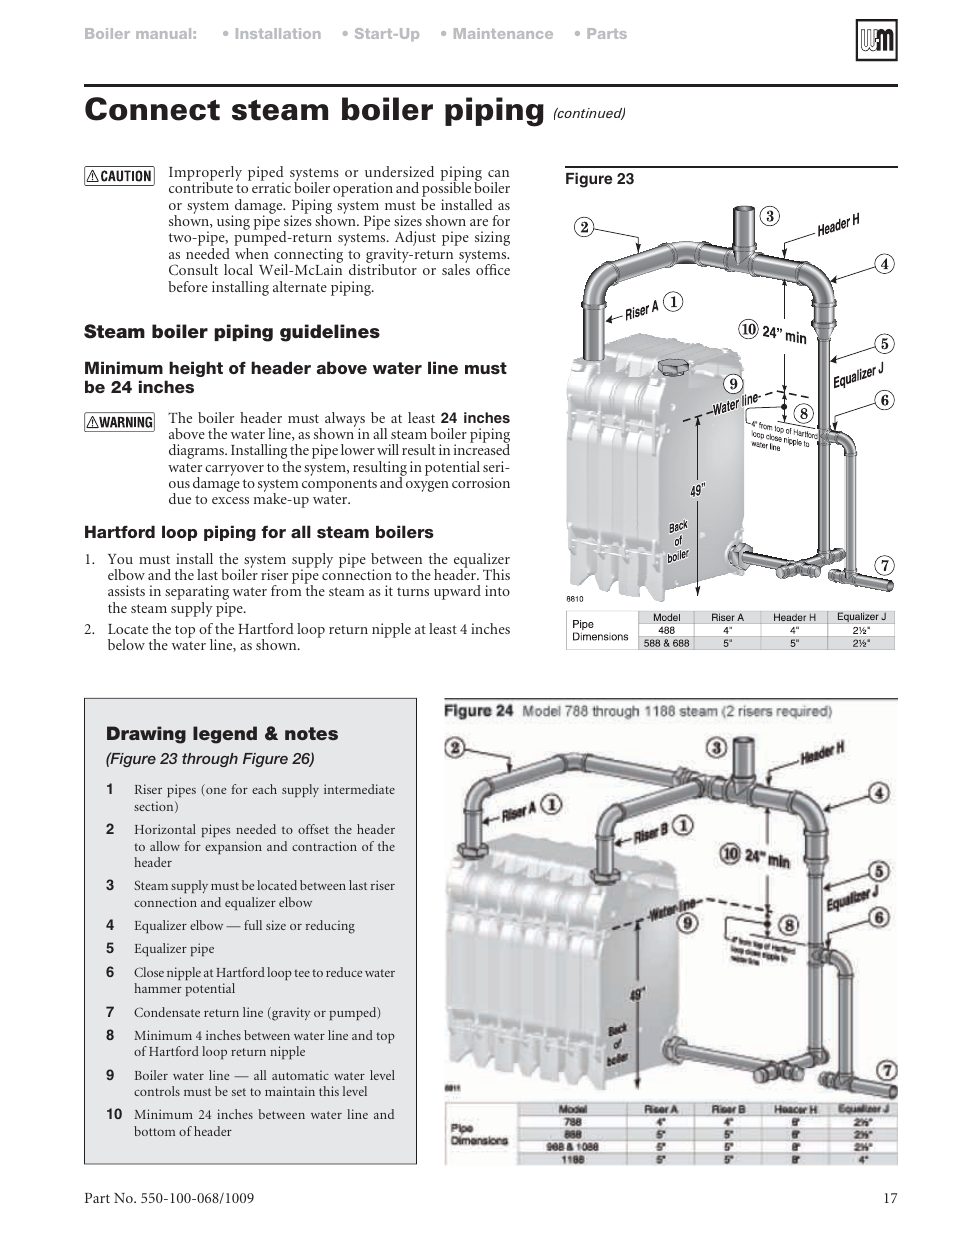 Connect Steam Boiler Piping